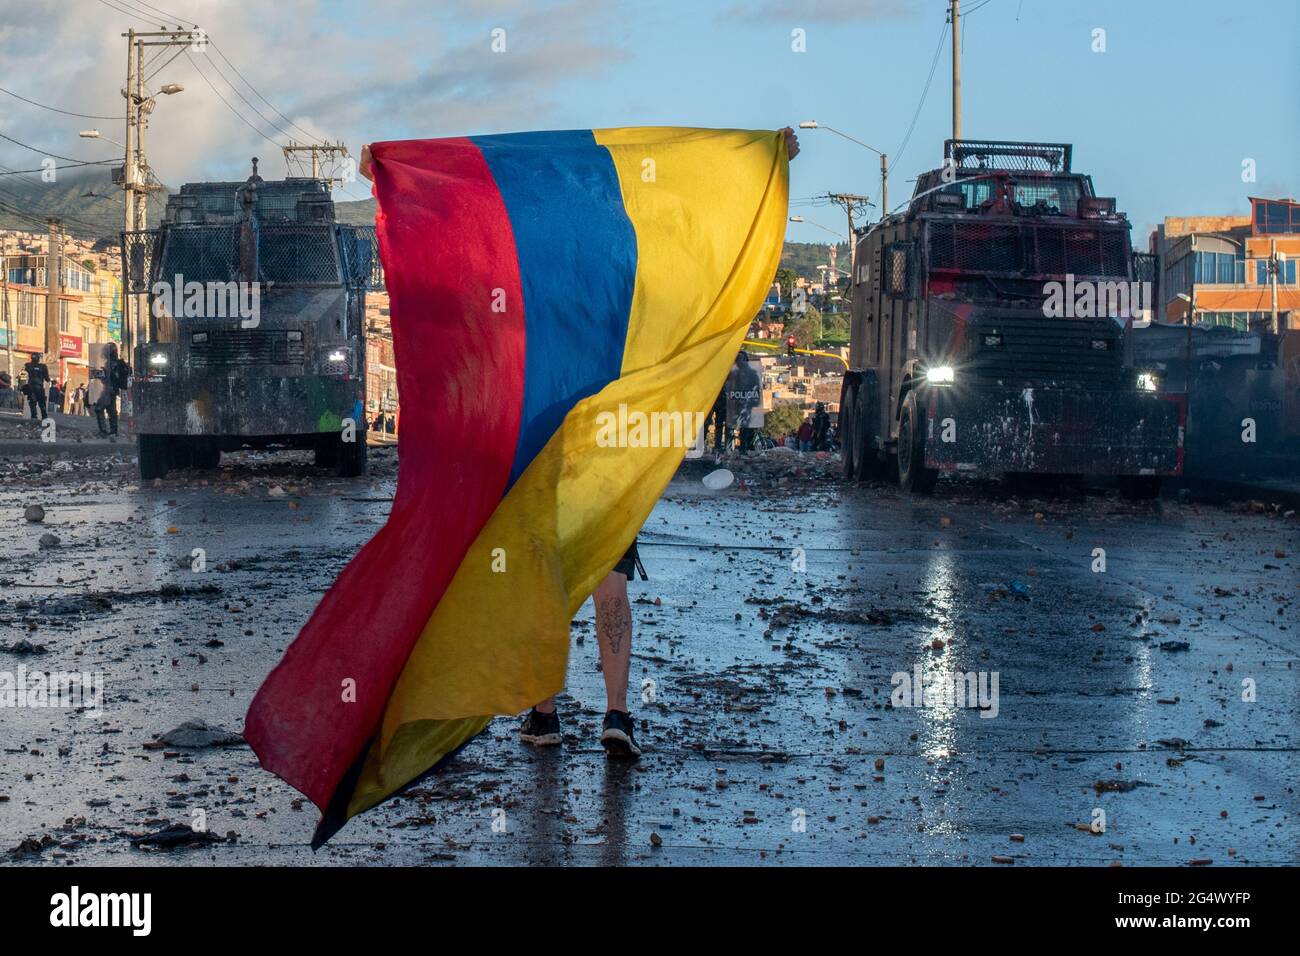 Bogota, Colombia. 21st June, 2021. A demonstrator waves a Colombian flah in the middle of two armored riot tanks as clashes between demonstratros and Colombia's riot police erupt anti-government protest raise in Bogota Colombia against the government of president Ivan Duque, inequalities and abuse of authority by police. Credit: Long Visual Press/Alamy Live News Stock Photo